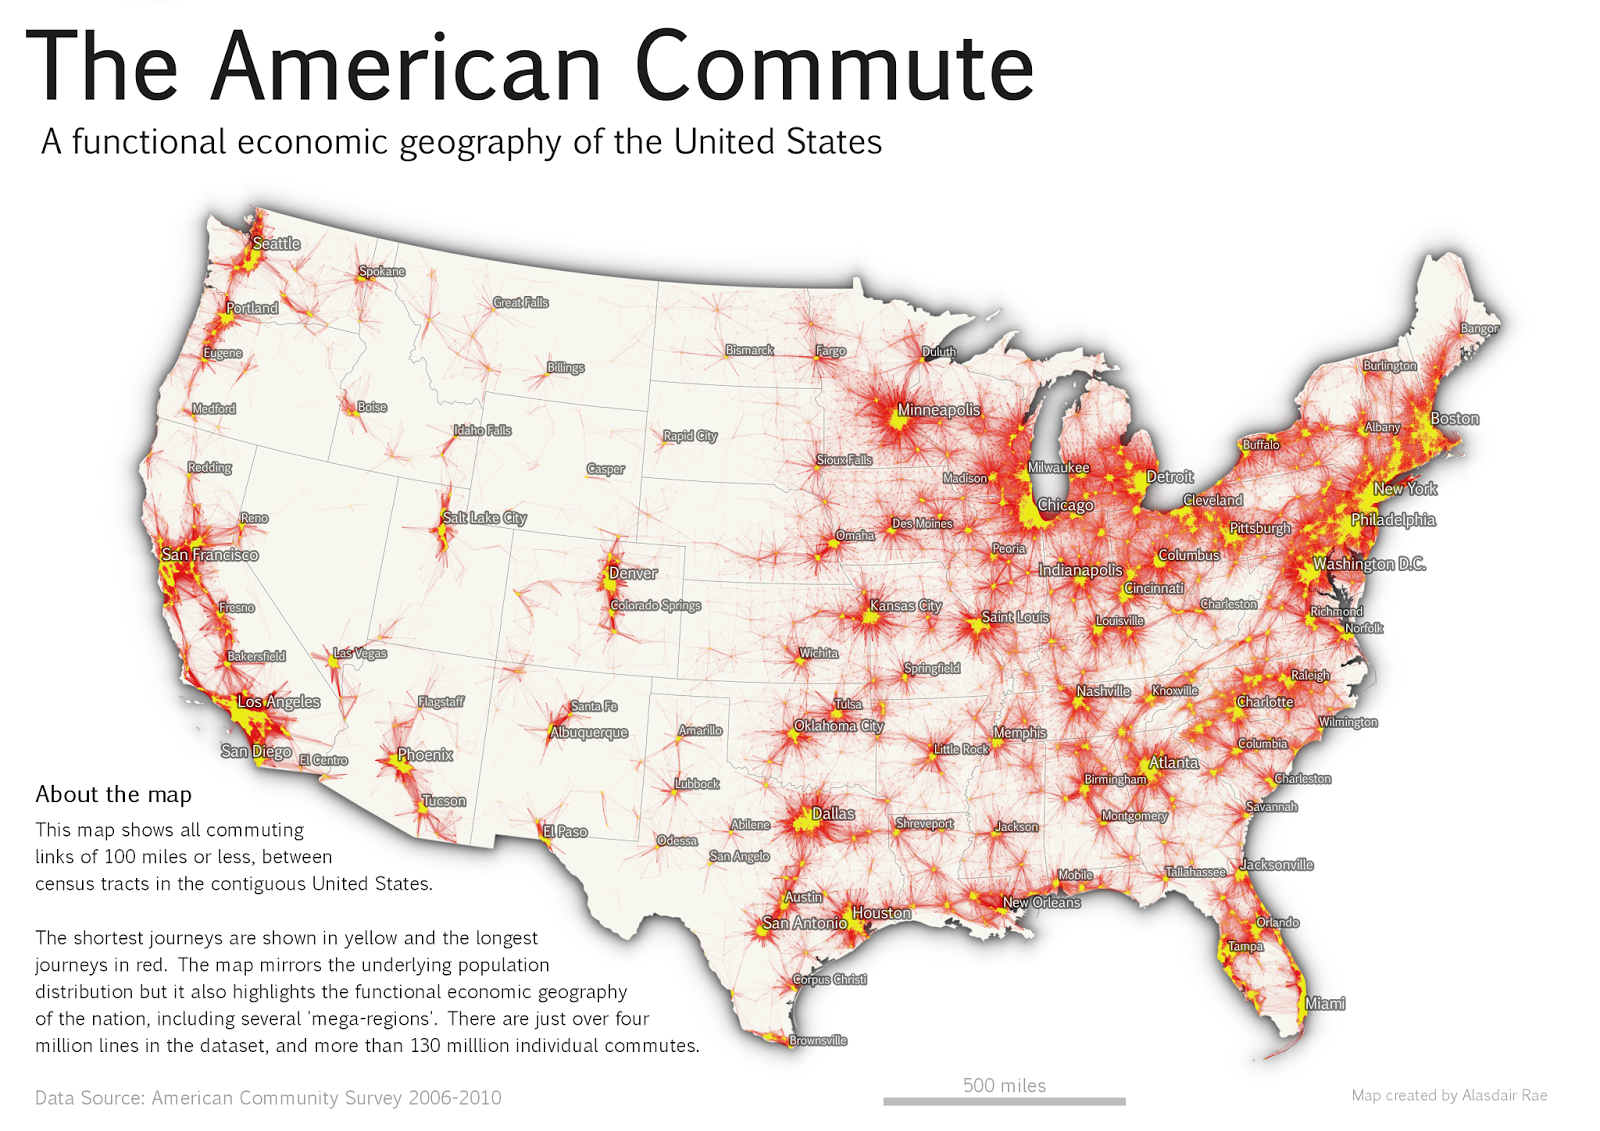 How Far Did You Commute? Our 2015 Commuting Methods By Mile